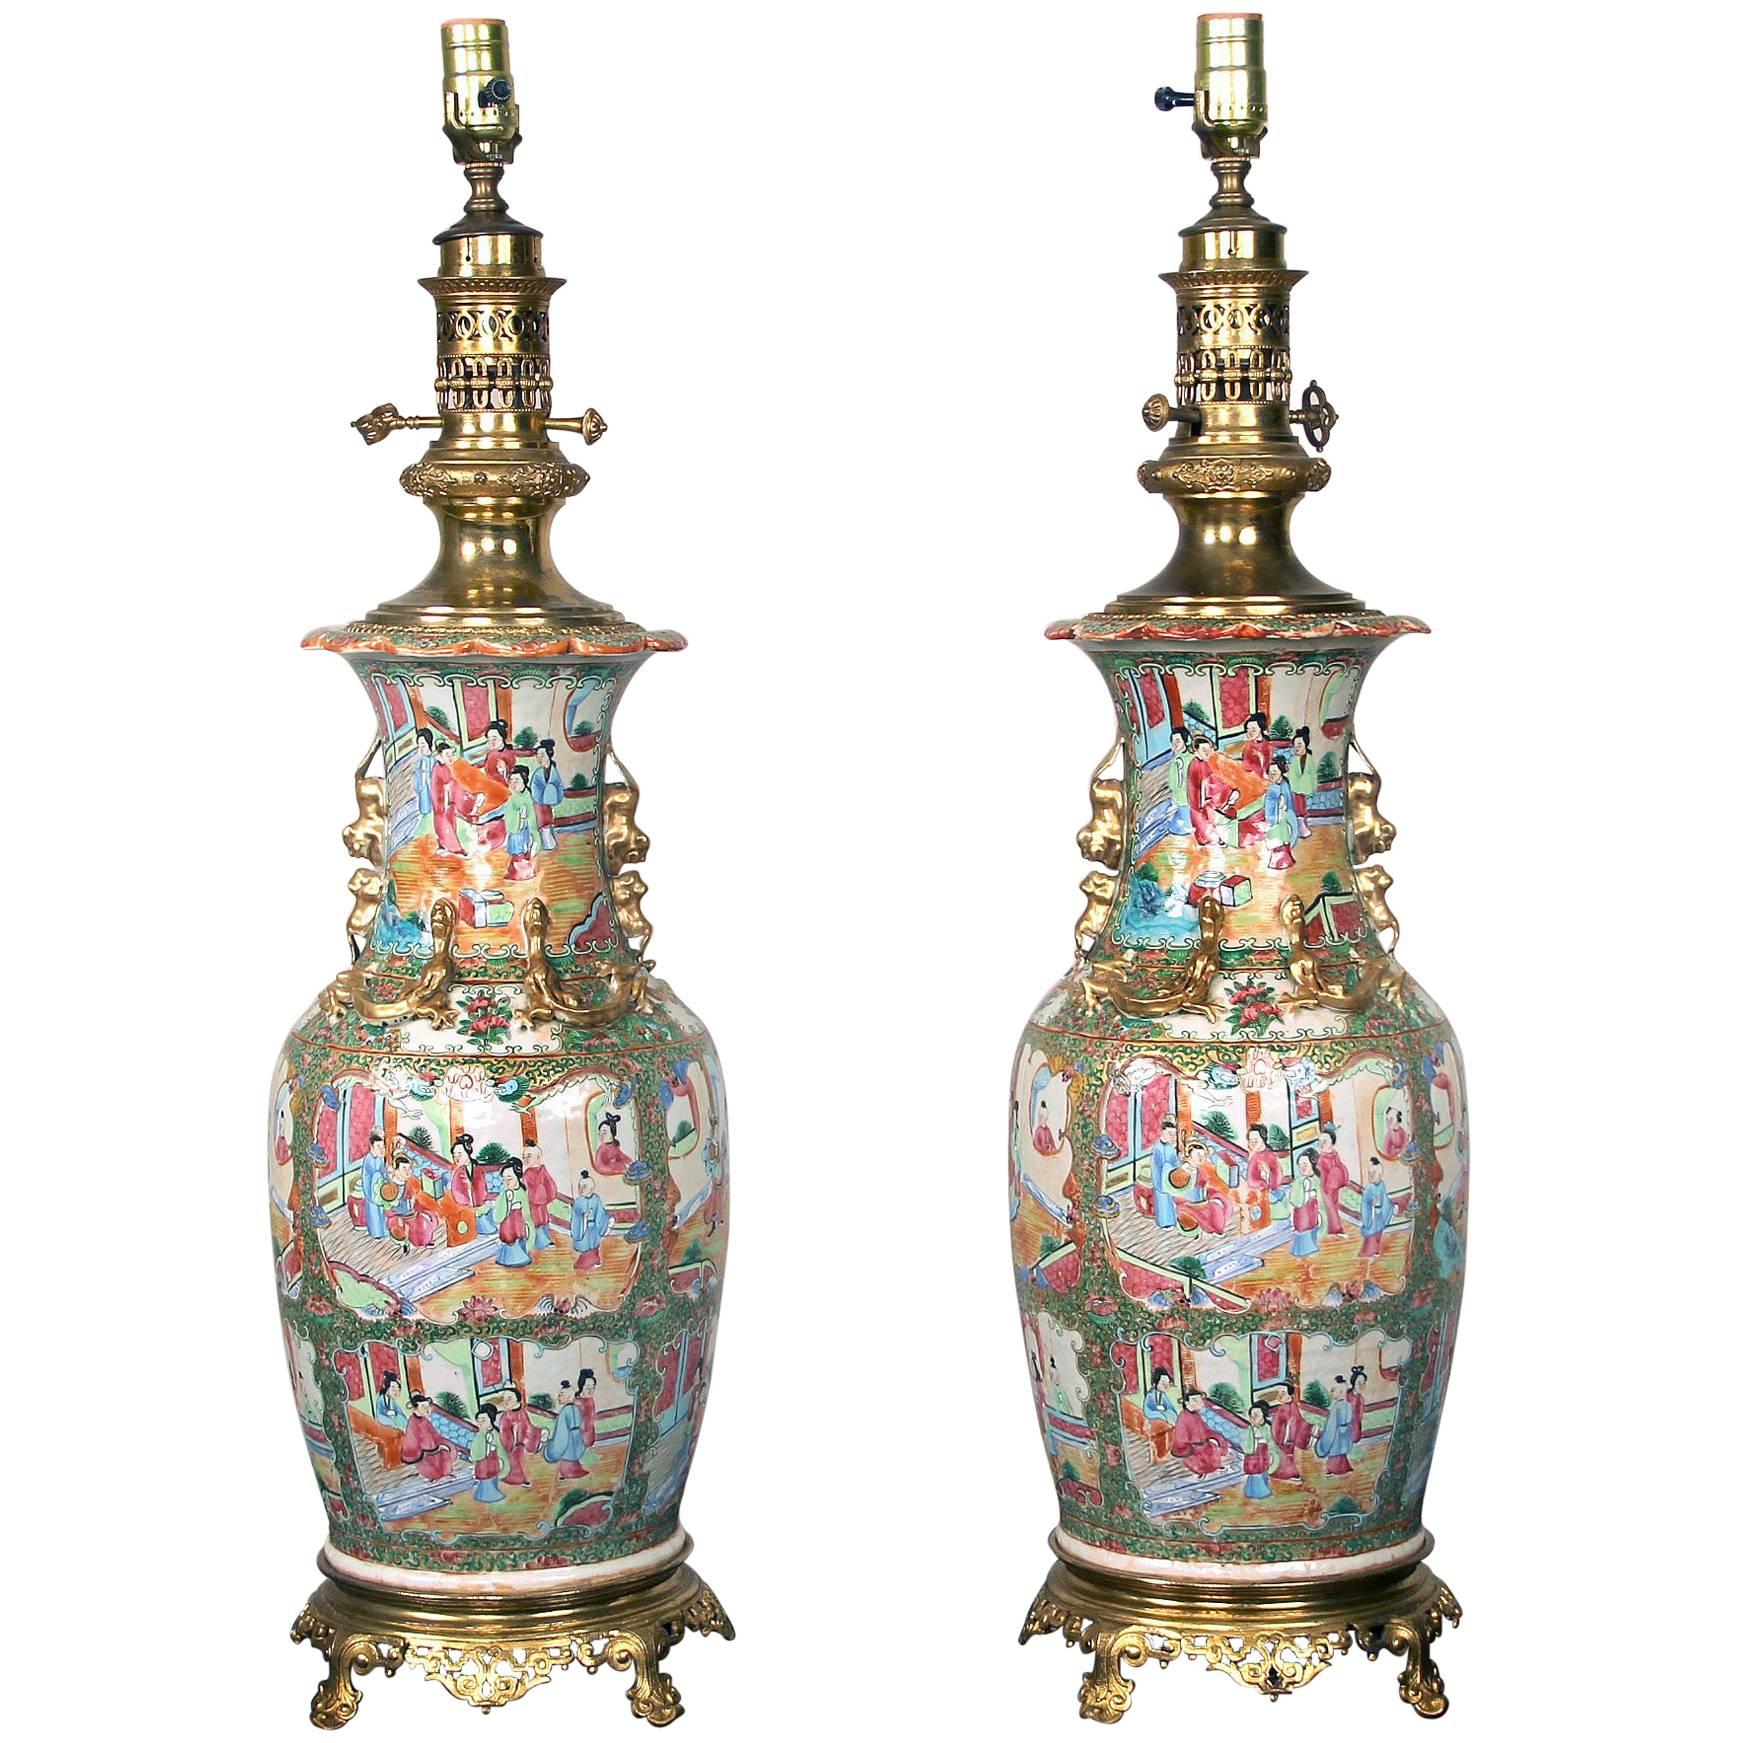 Pair of Late 19th Century French Gilt Bronze-Mounted Chinese Canton Porcelain